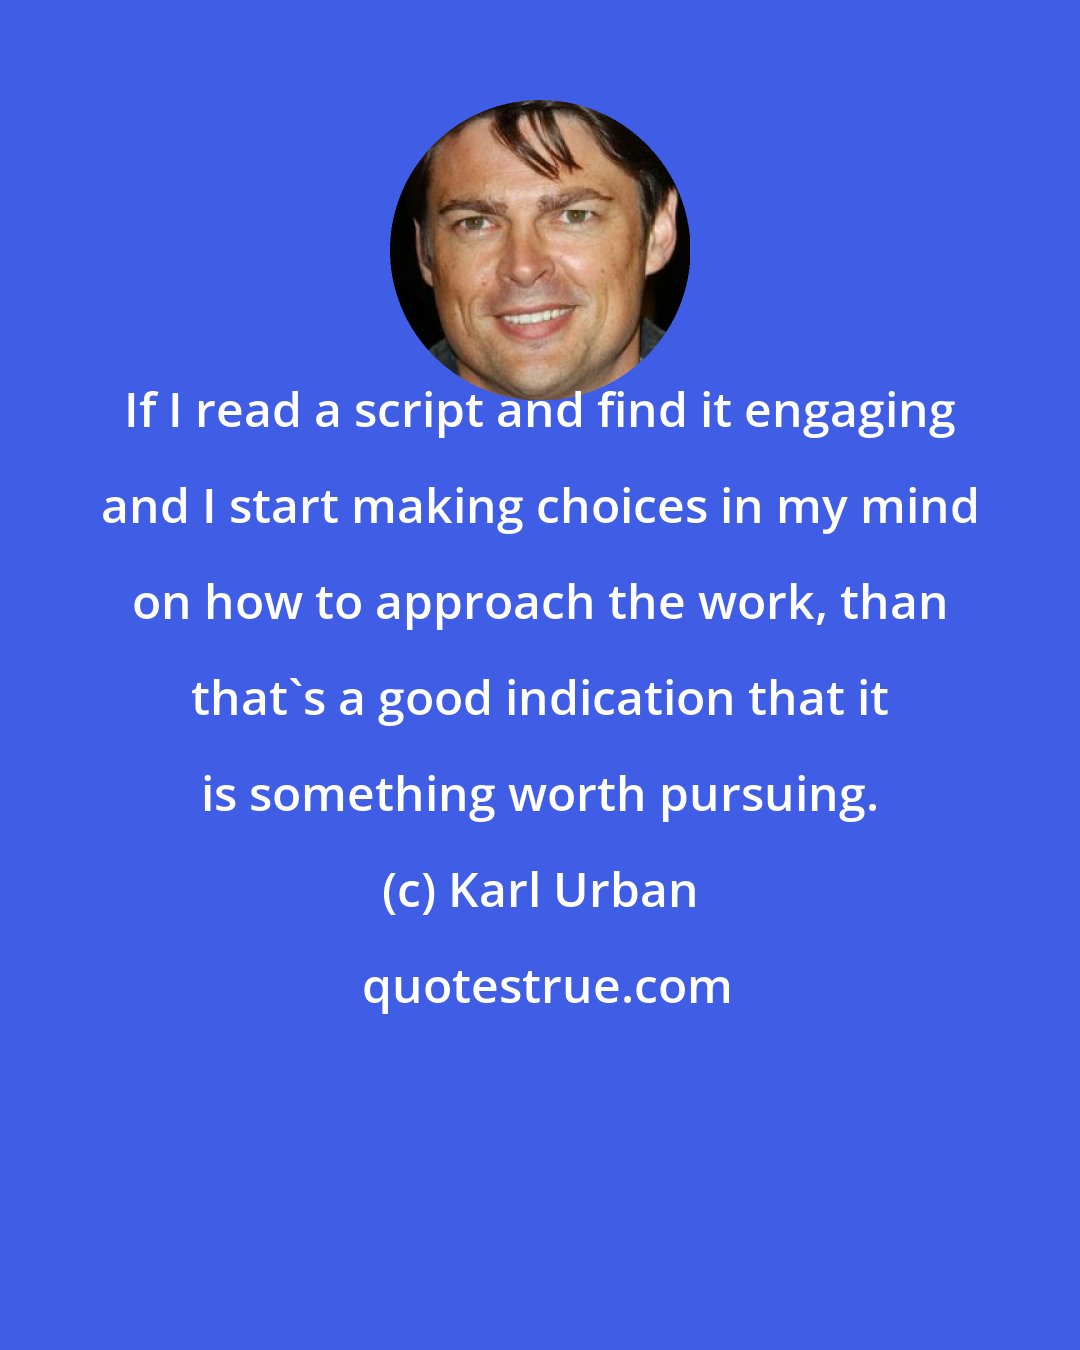 Karl Urban: If I read a script and find it engaging and I start making choices in my mind on how to approach the work, than that's a good indication that it is something worth pursuing.